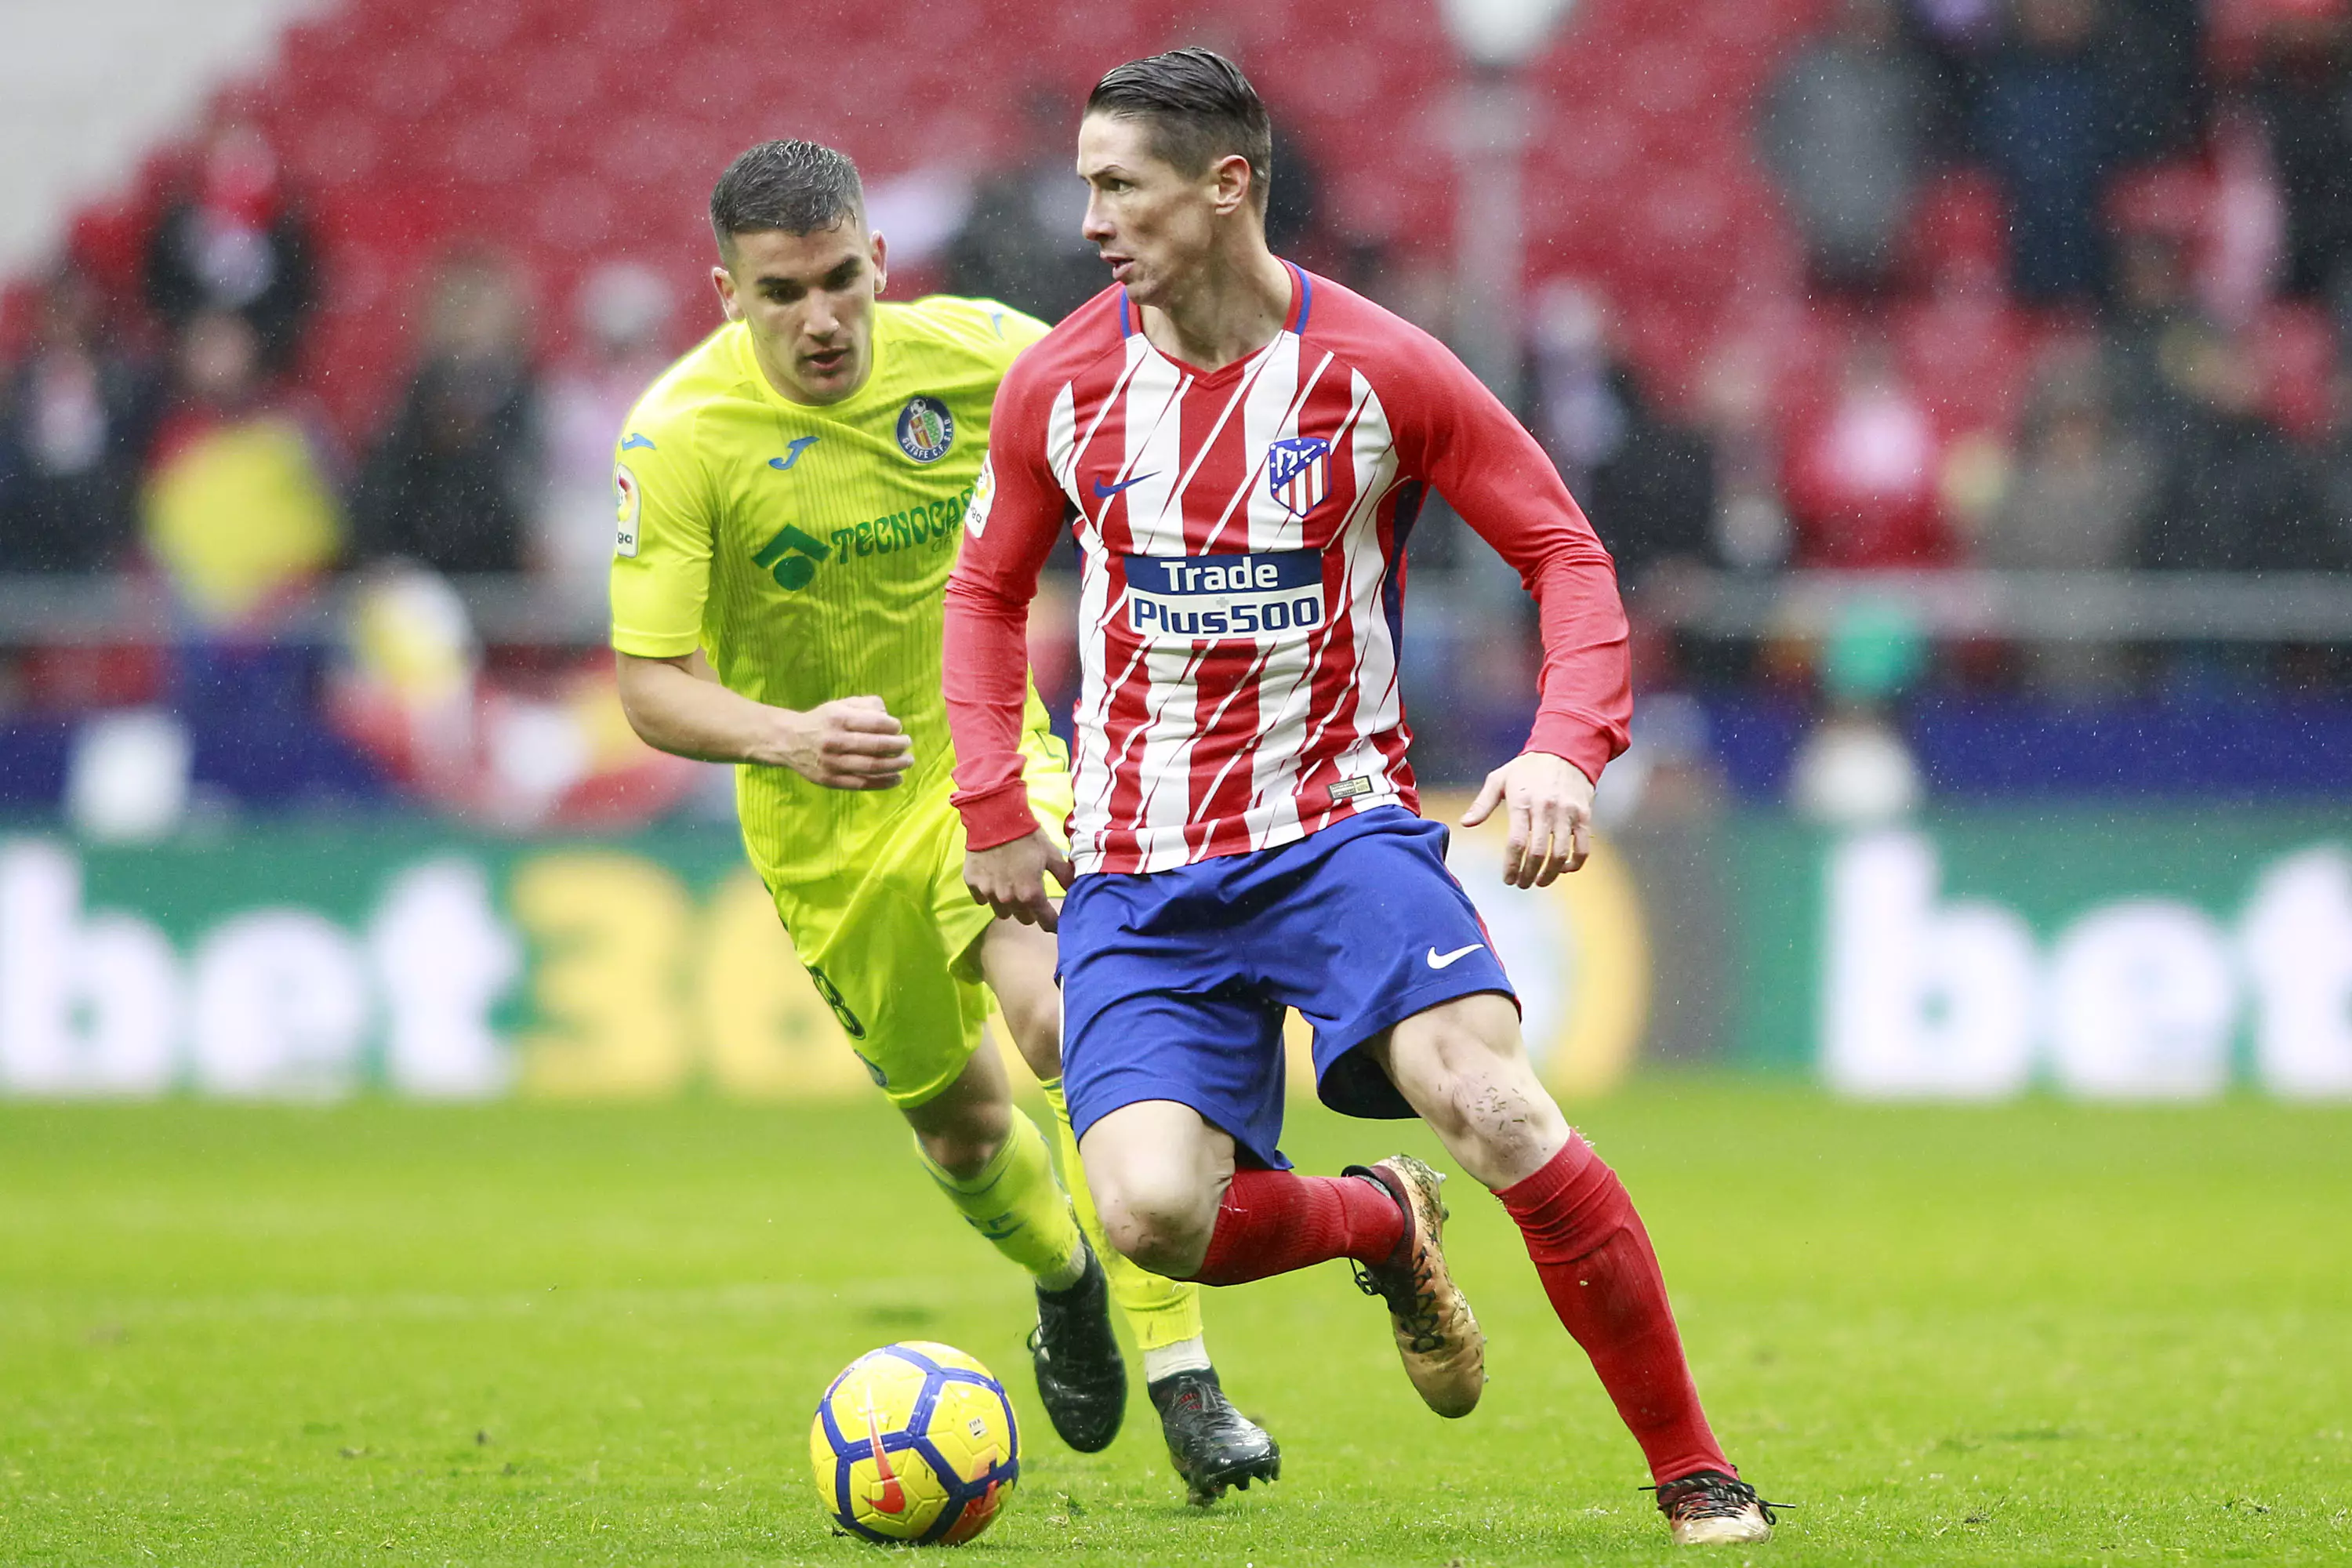 Torres in action for Atletico Madrid. Image: PA